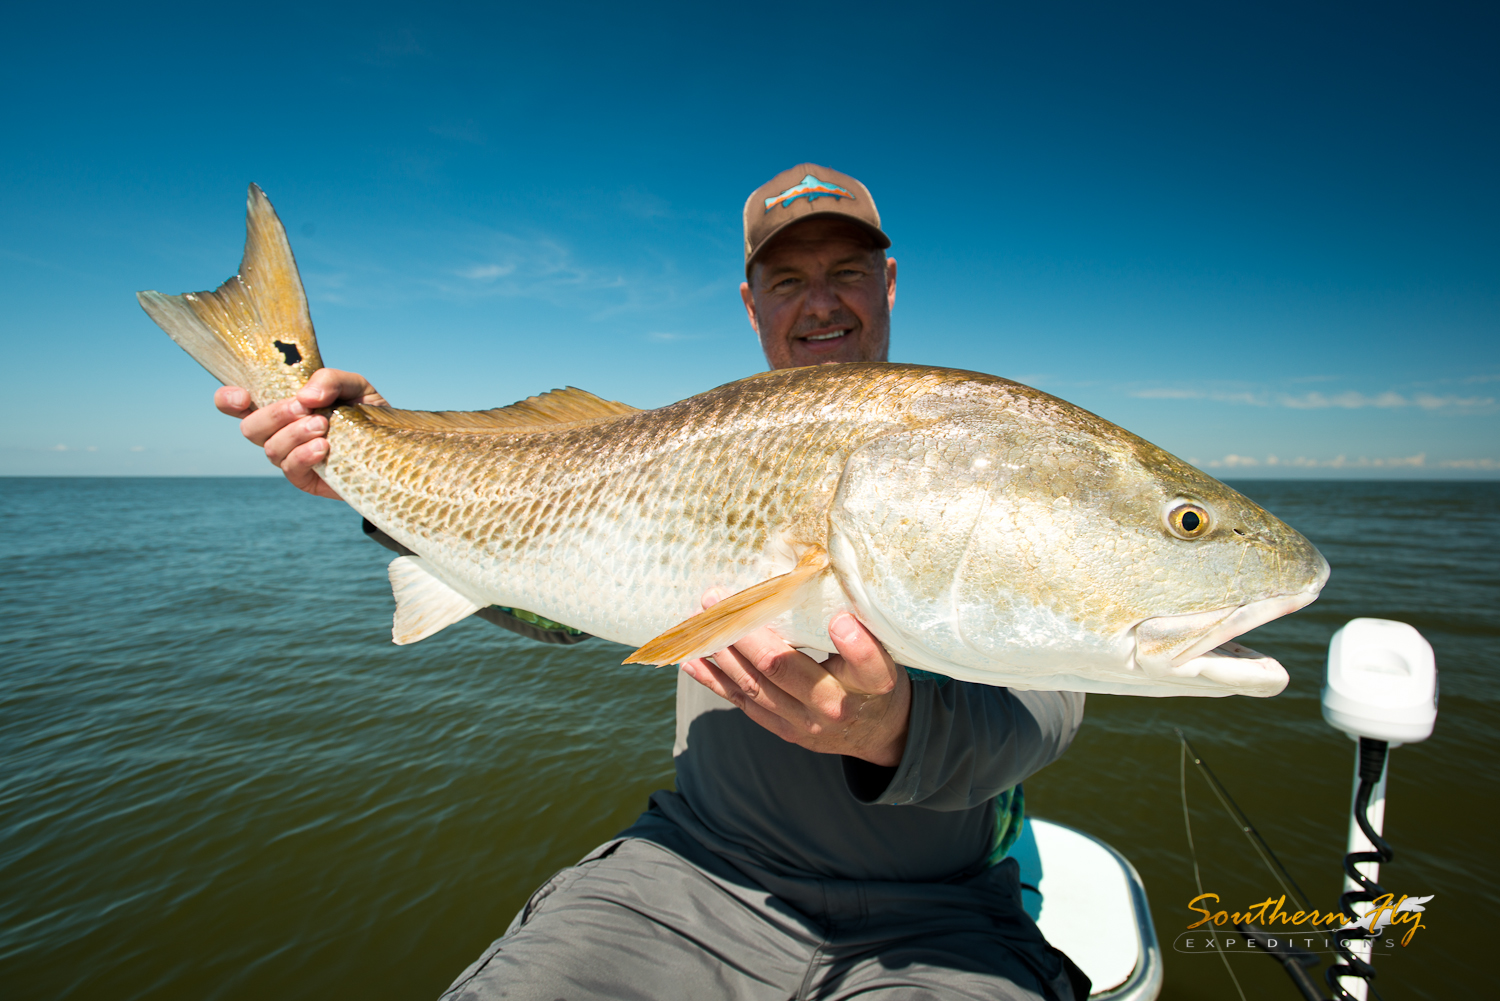 fly fishing redfish guide new orleans louisiana with southern fly expeditions and captain brandon keck 